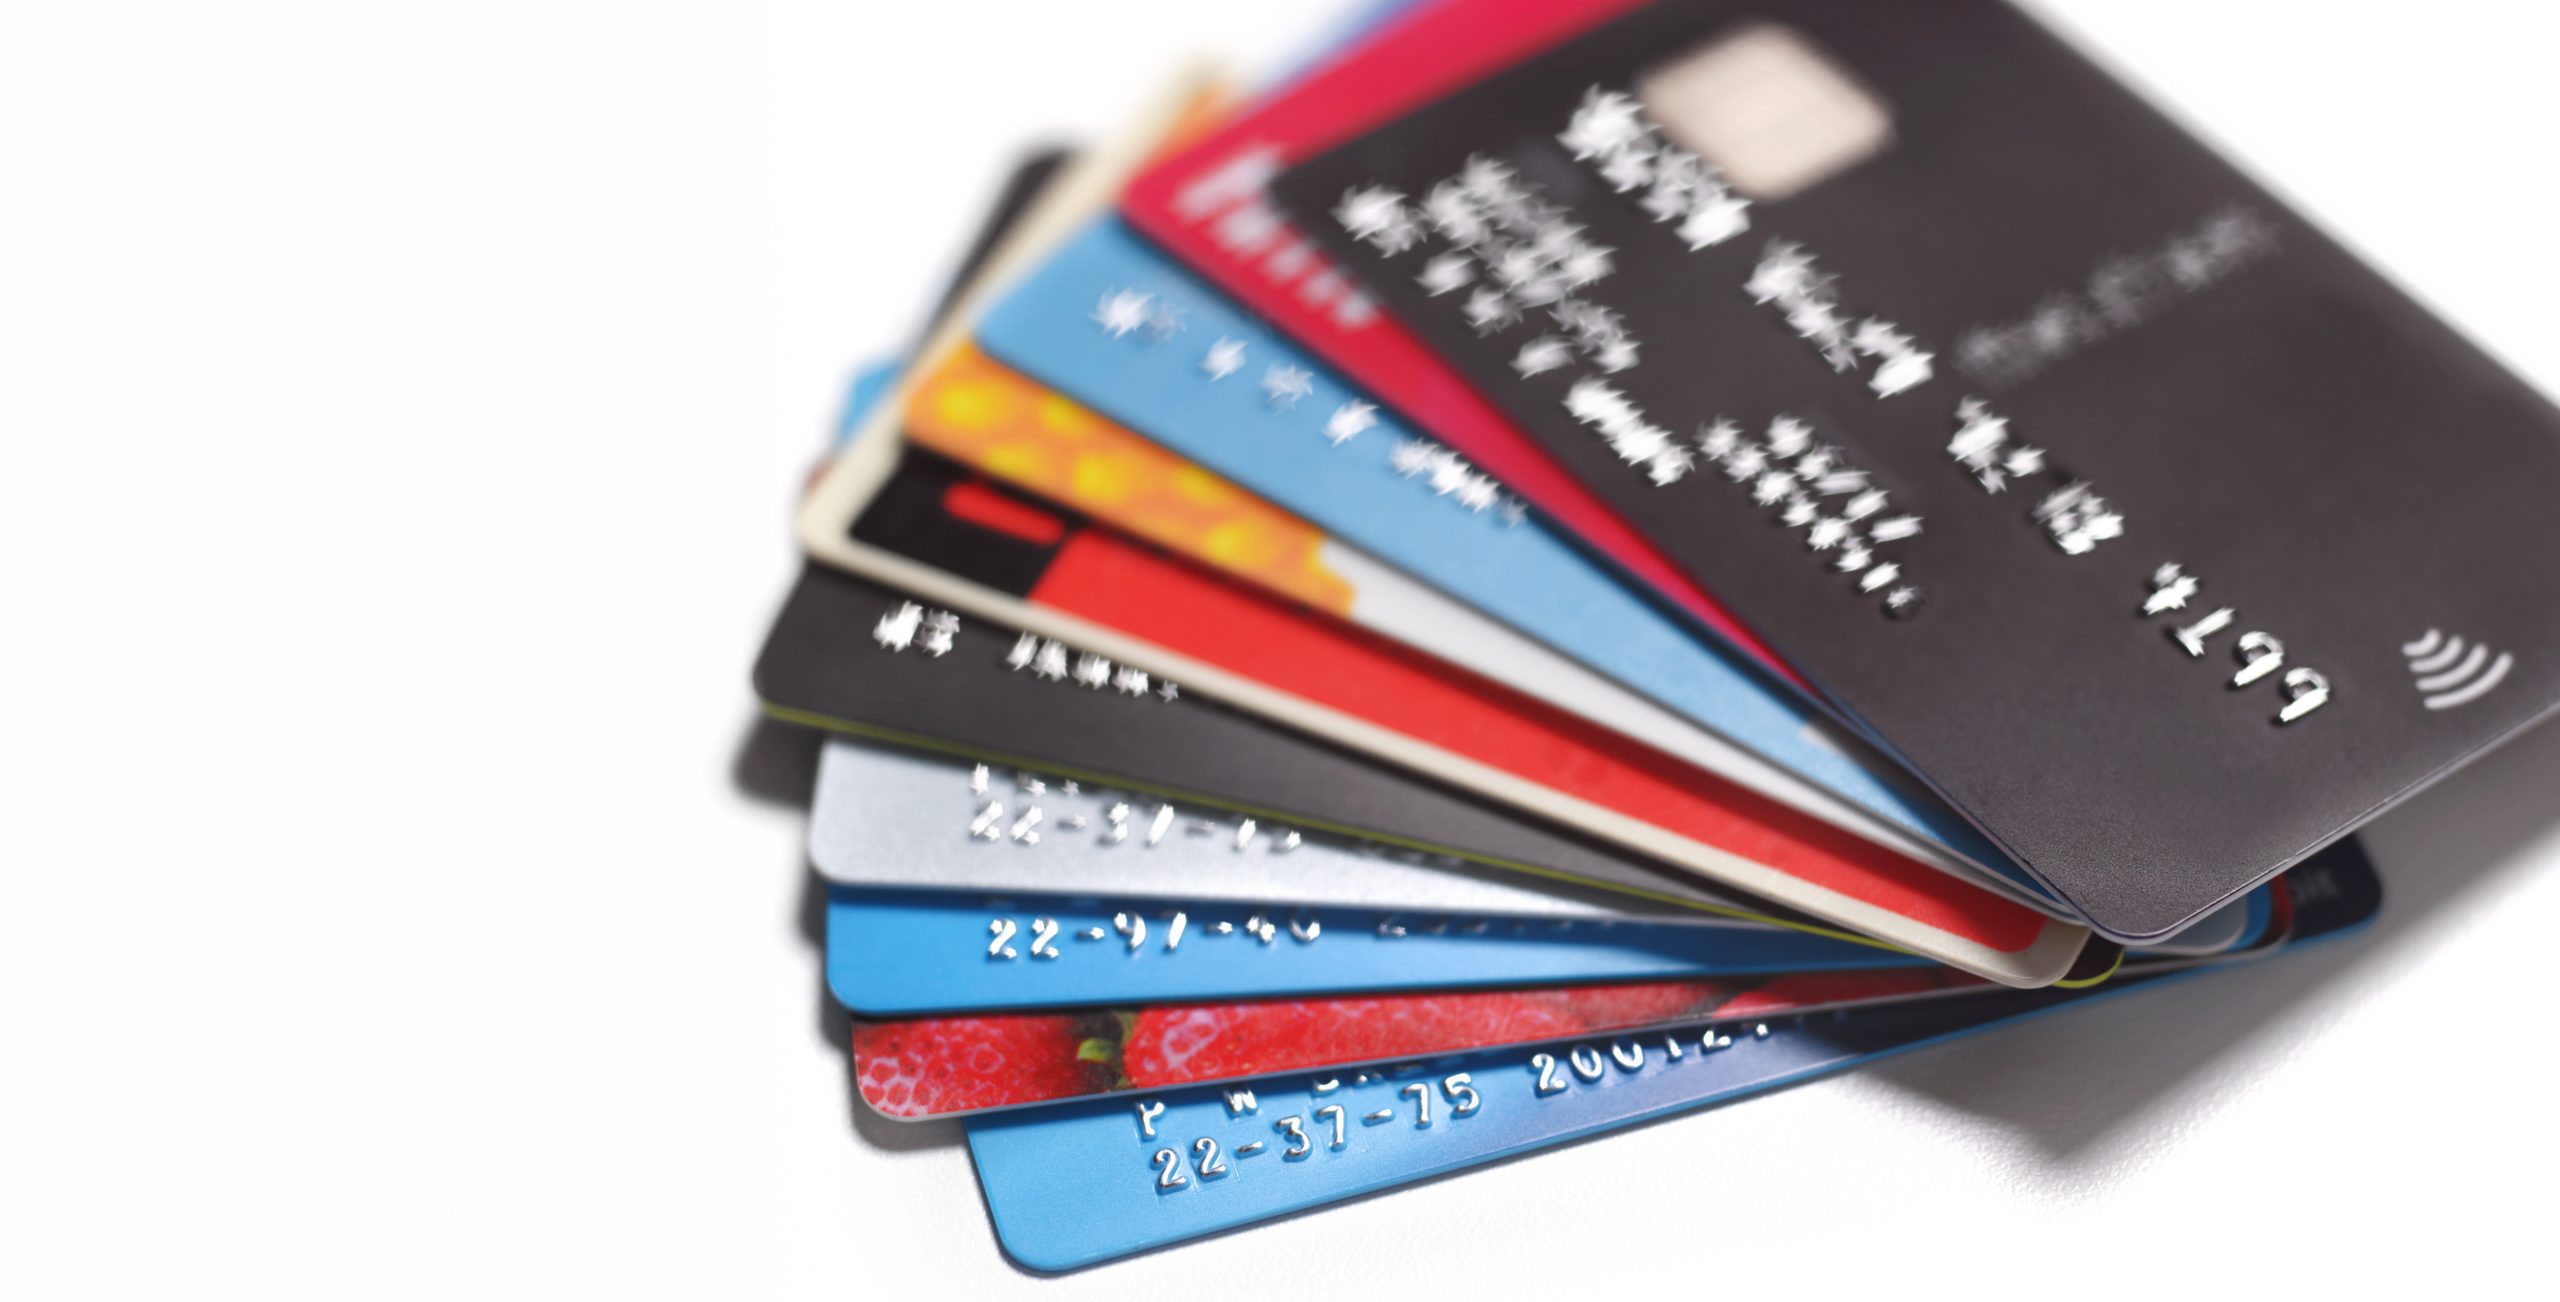 Here’s What You Need To Know About Using Credit Cards